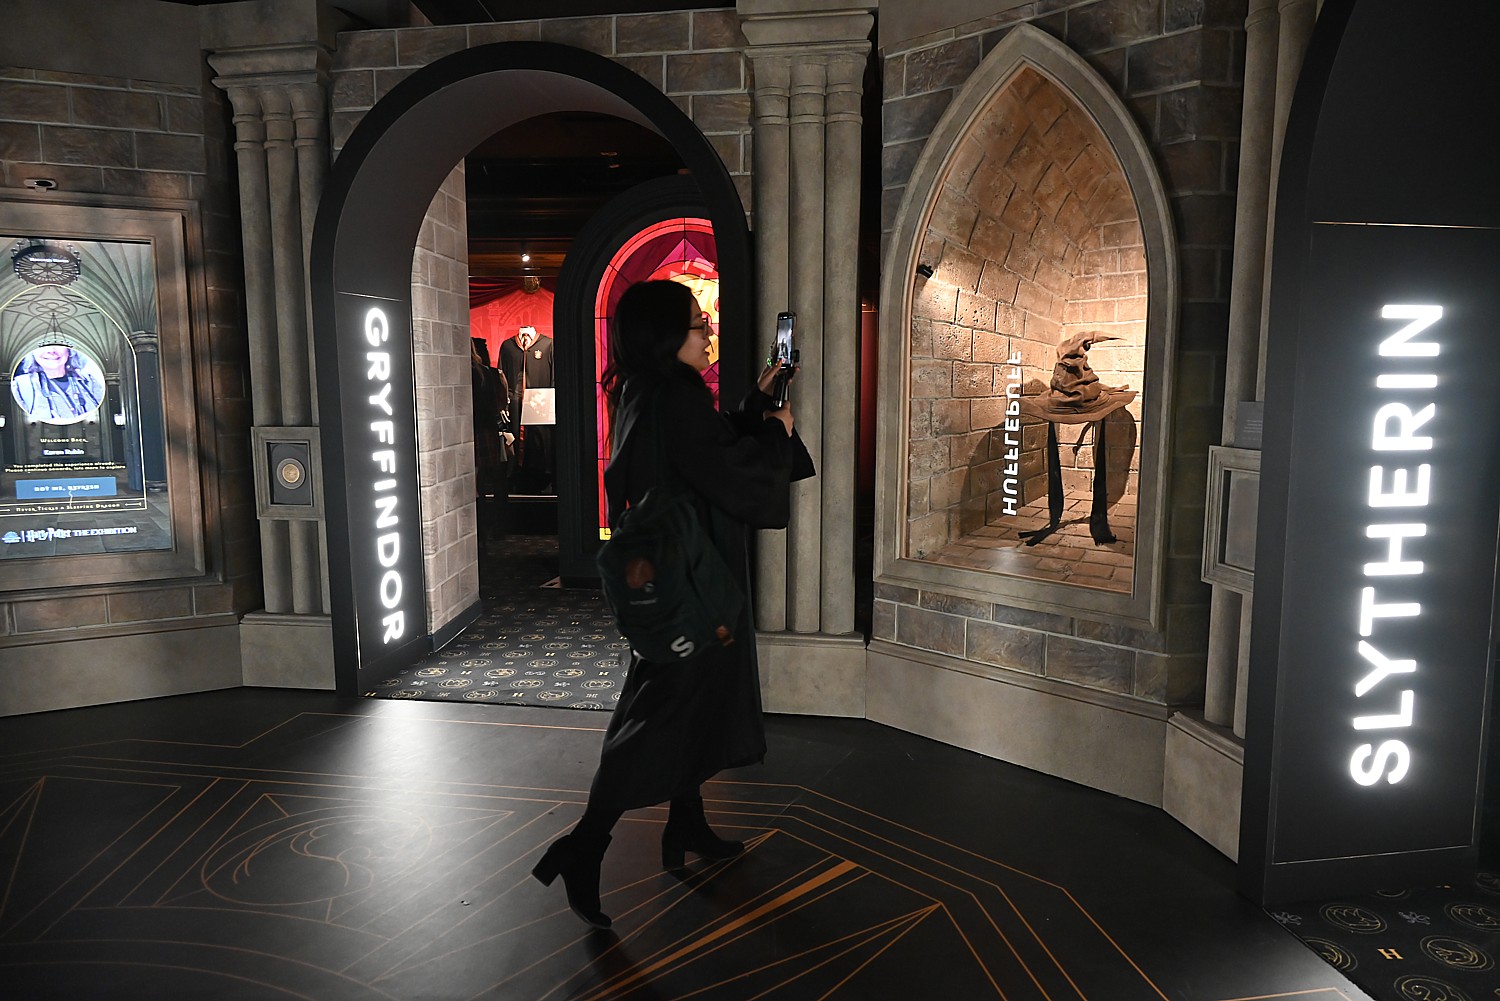 Complete Guide to Harry Potter: The Exhibition in Philadelphia